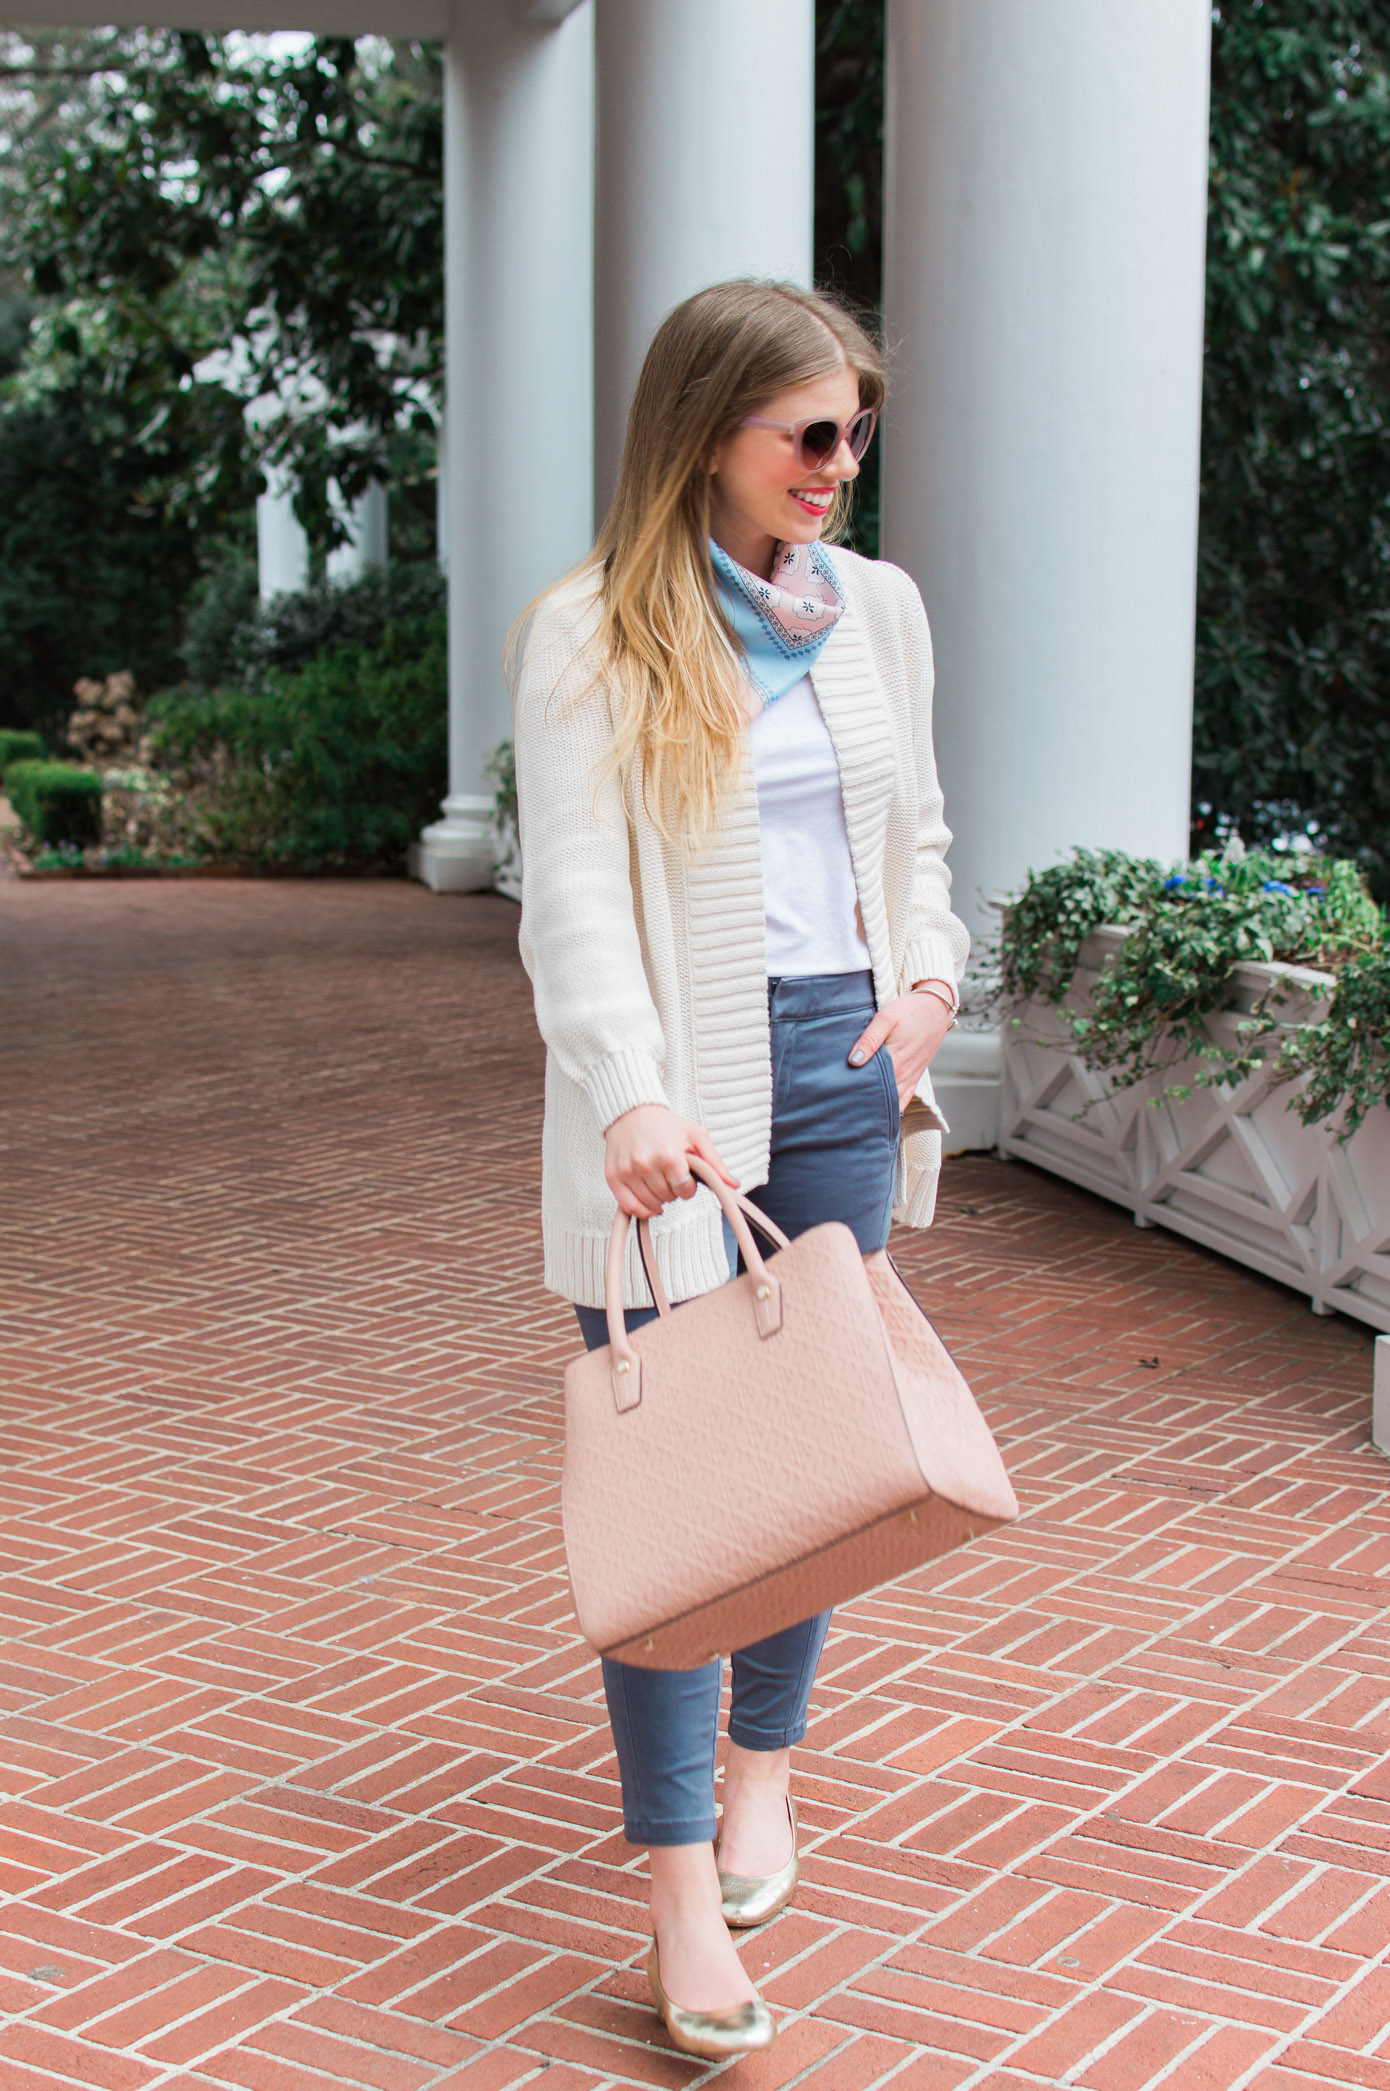 Blush Accessories | Accessories to Transition into Spring | Louella Reese Life & Style Blog